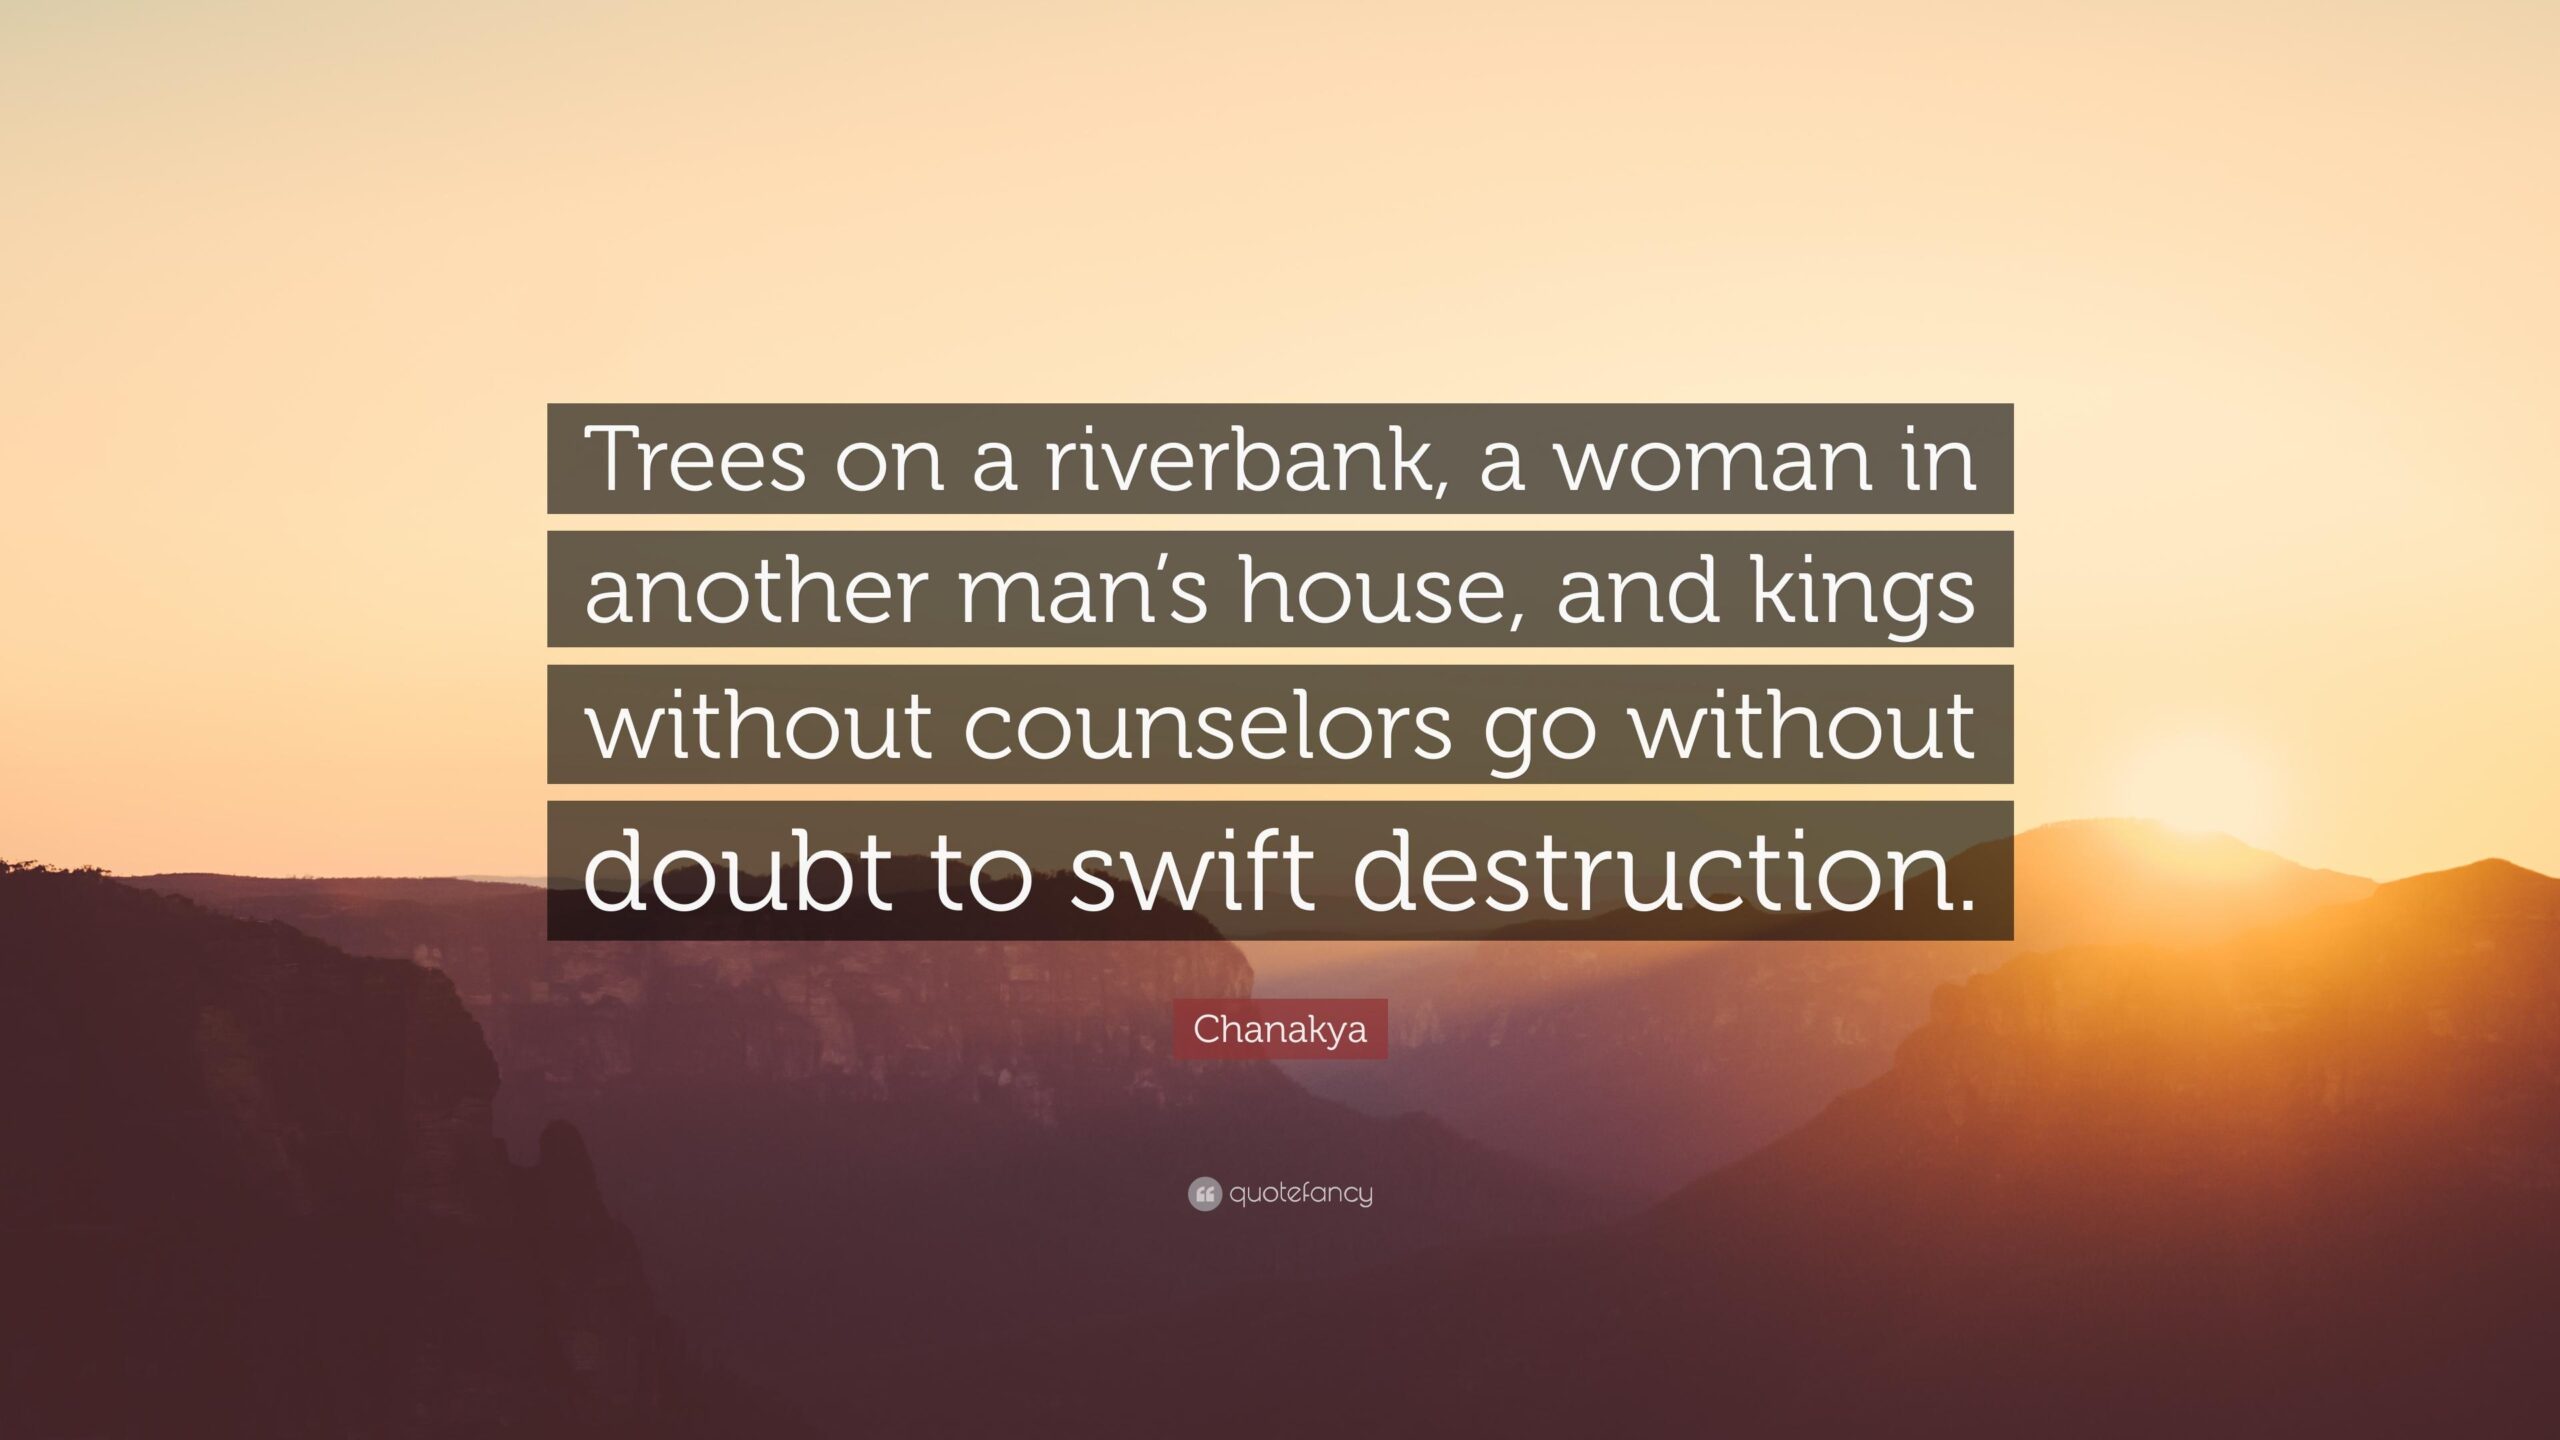 Chanakya Quote “Trees on a riverbank, a woman in another man’s